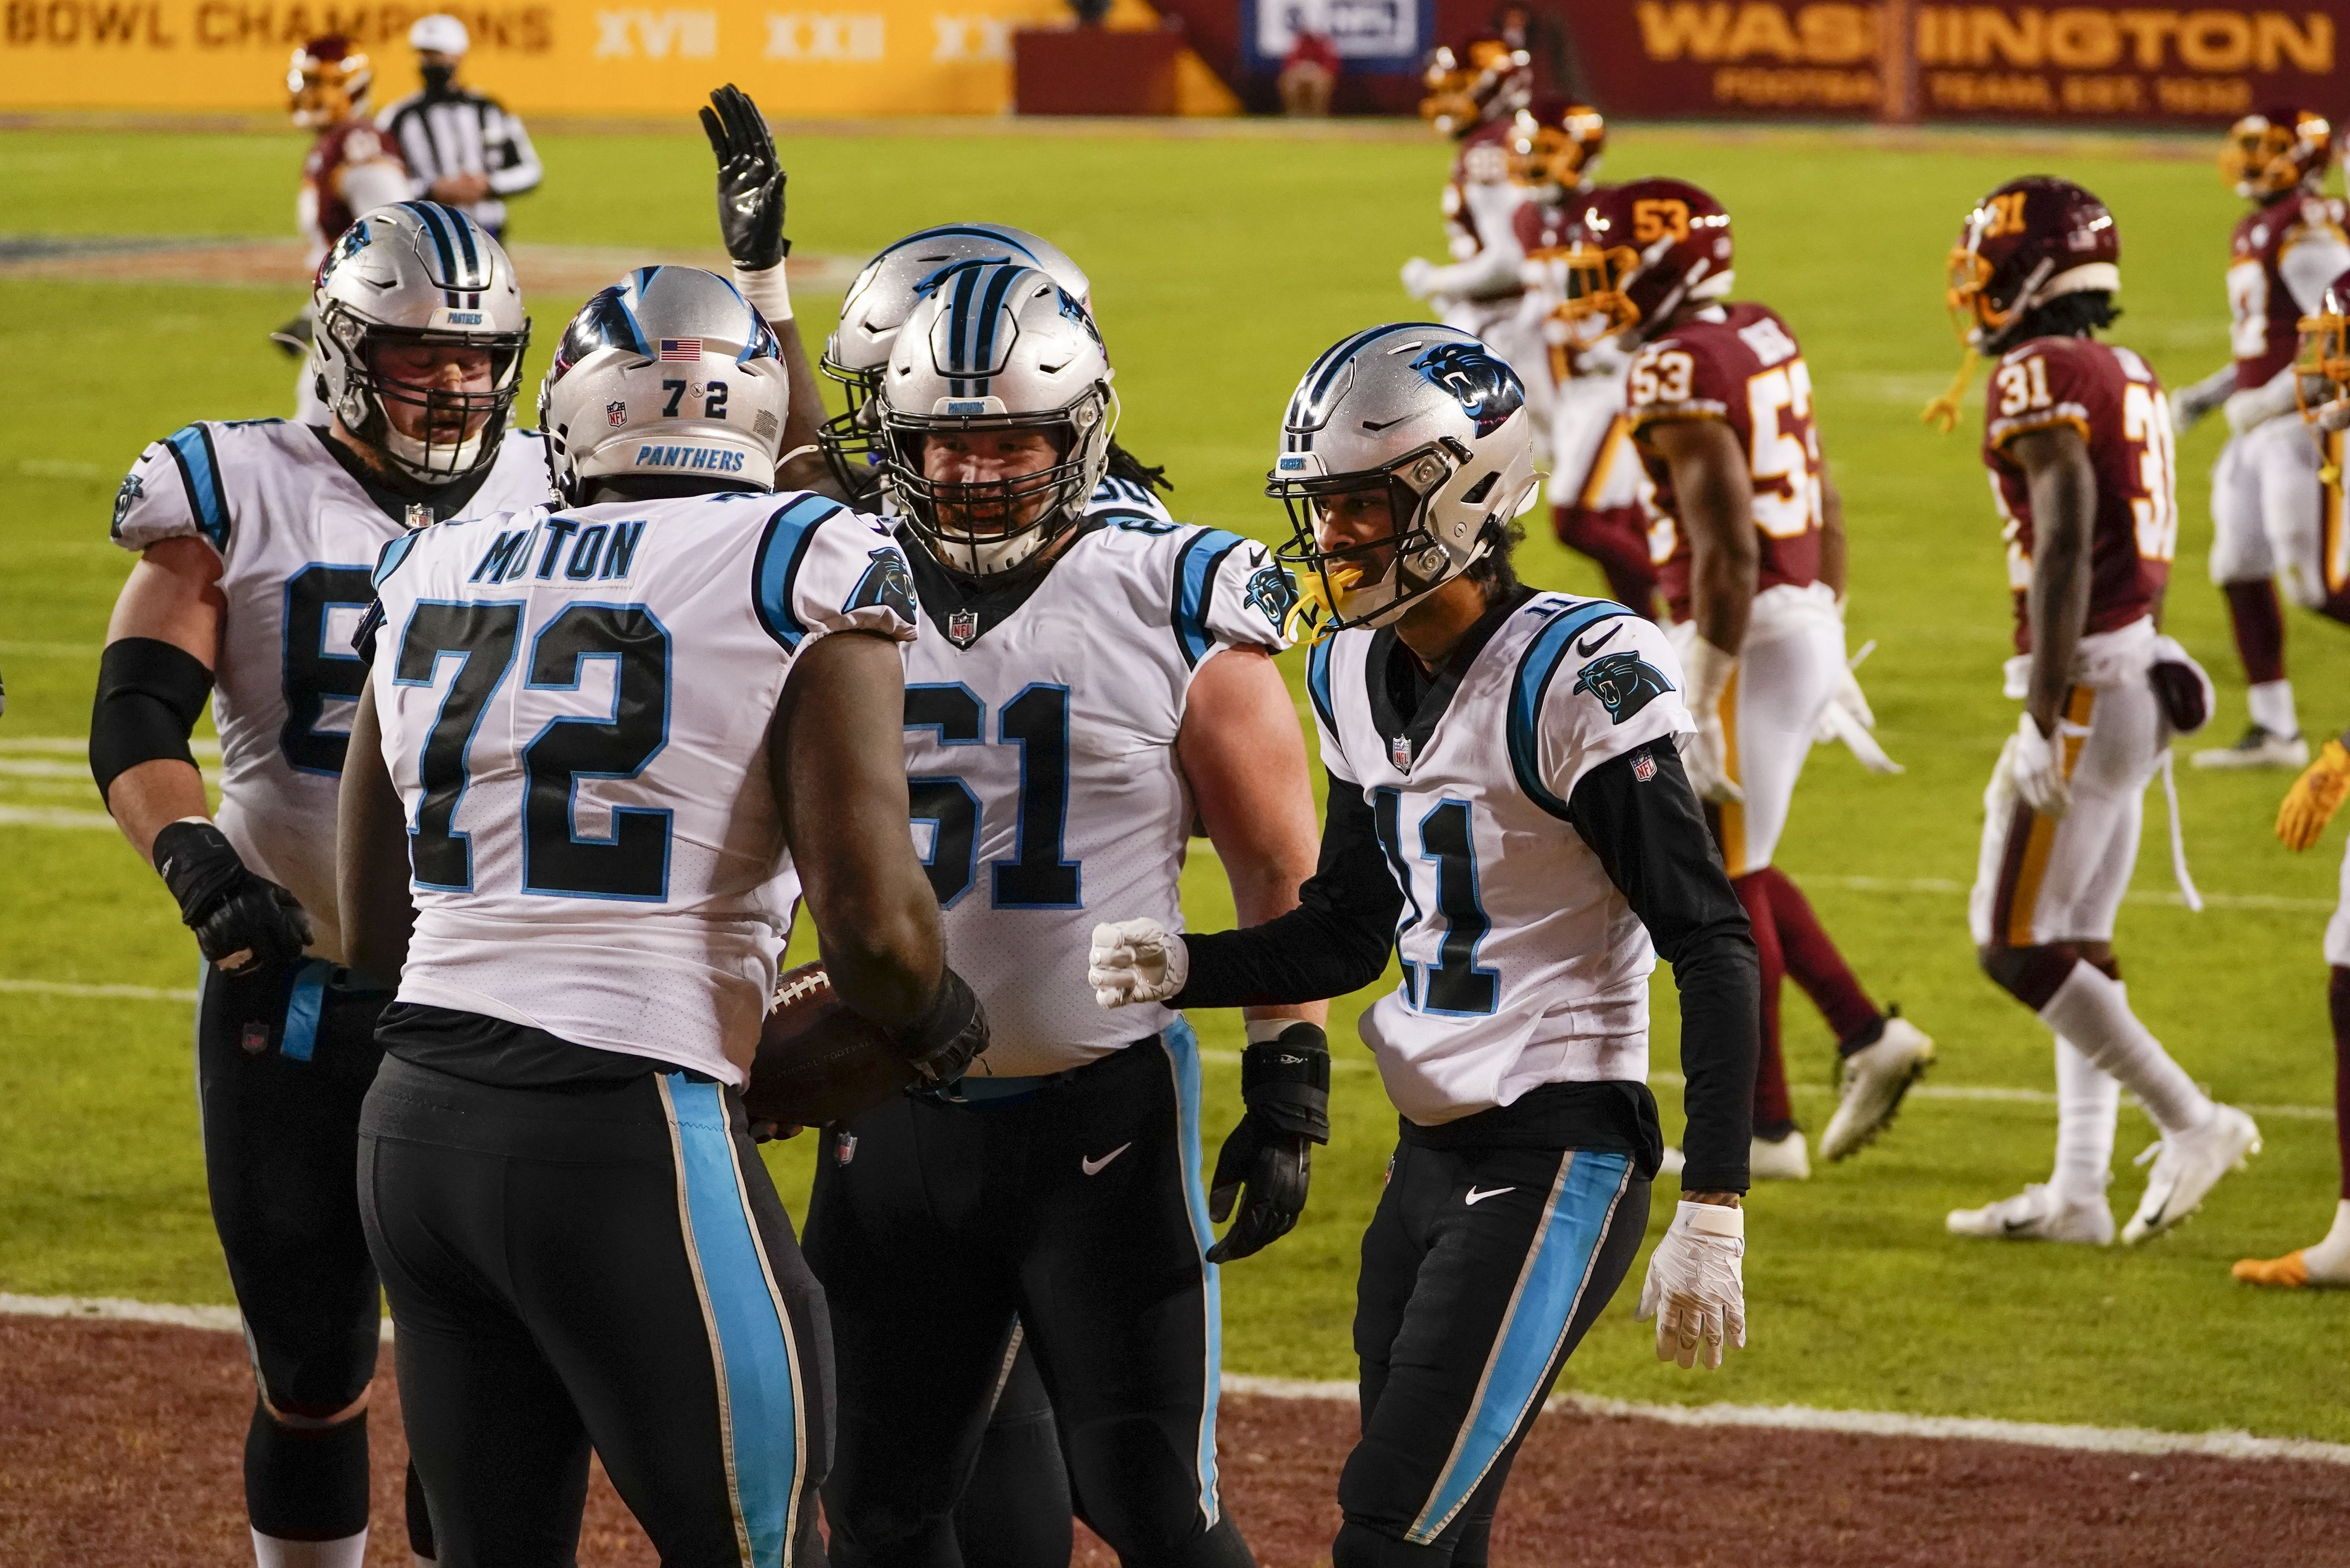 WSOC-TV - The Carolina Panthers beat the Washington Commanders, 23-21, in  today's matchup. Click here for photos from the game >>